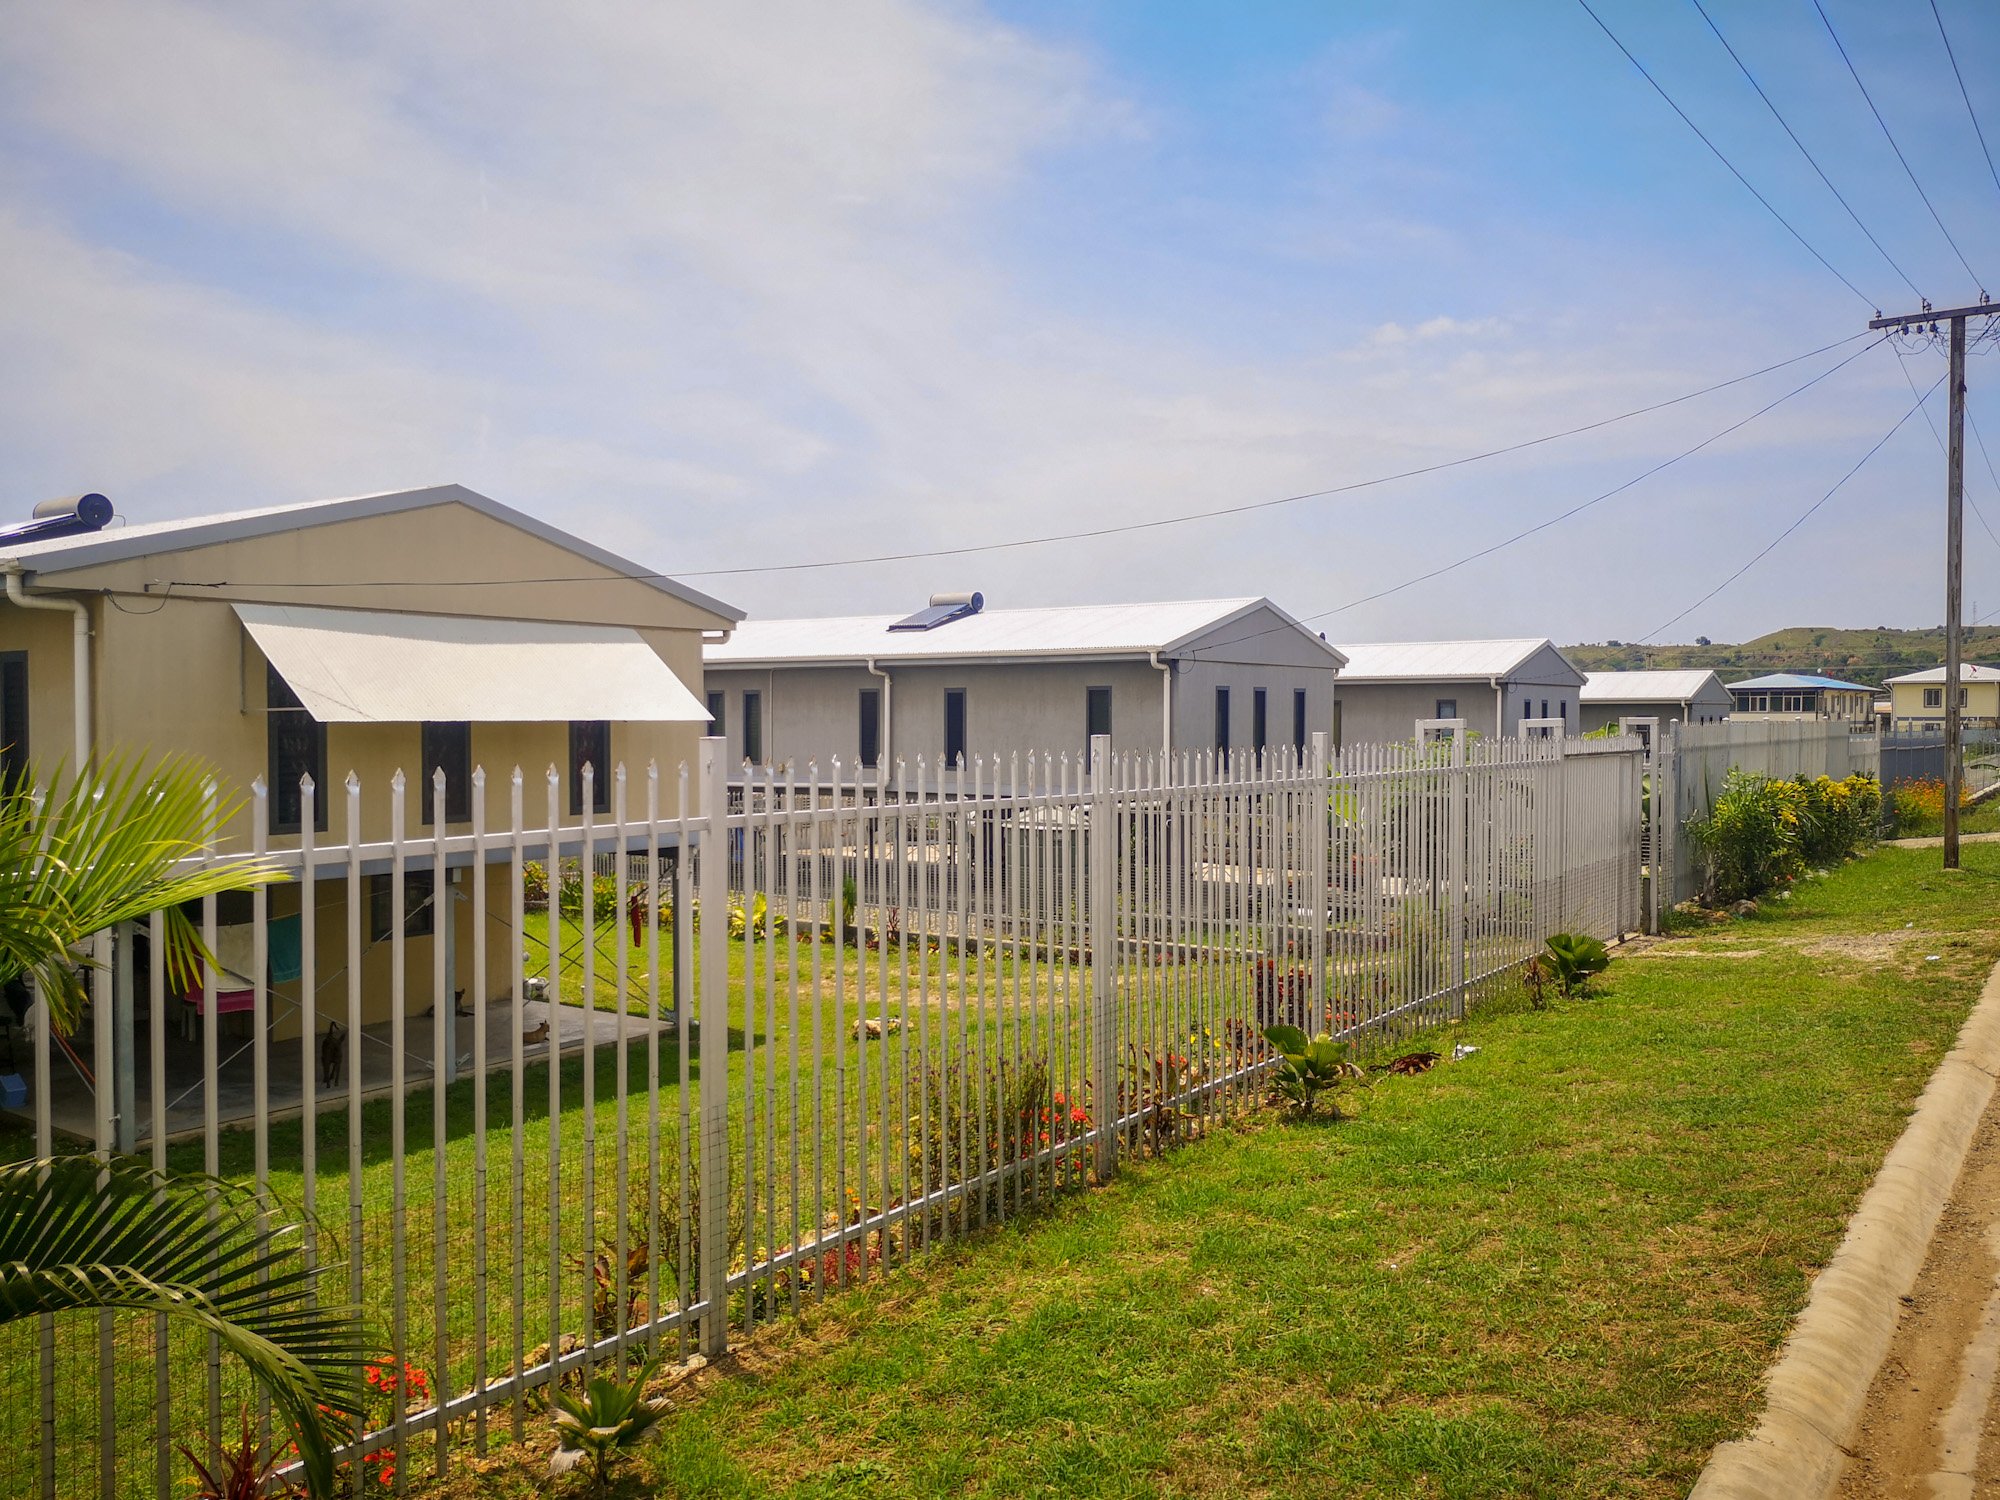 Affordable Housing Supply and Demand Trend in Port Moresby